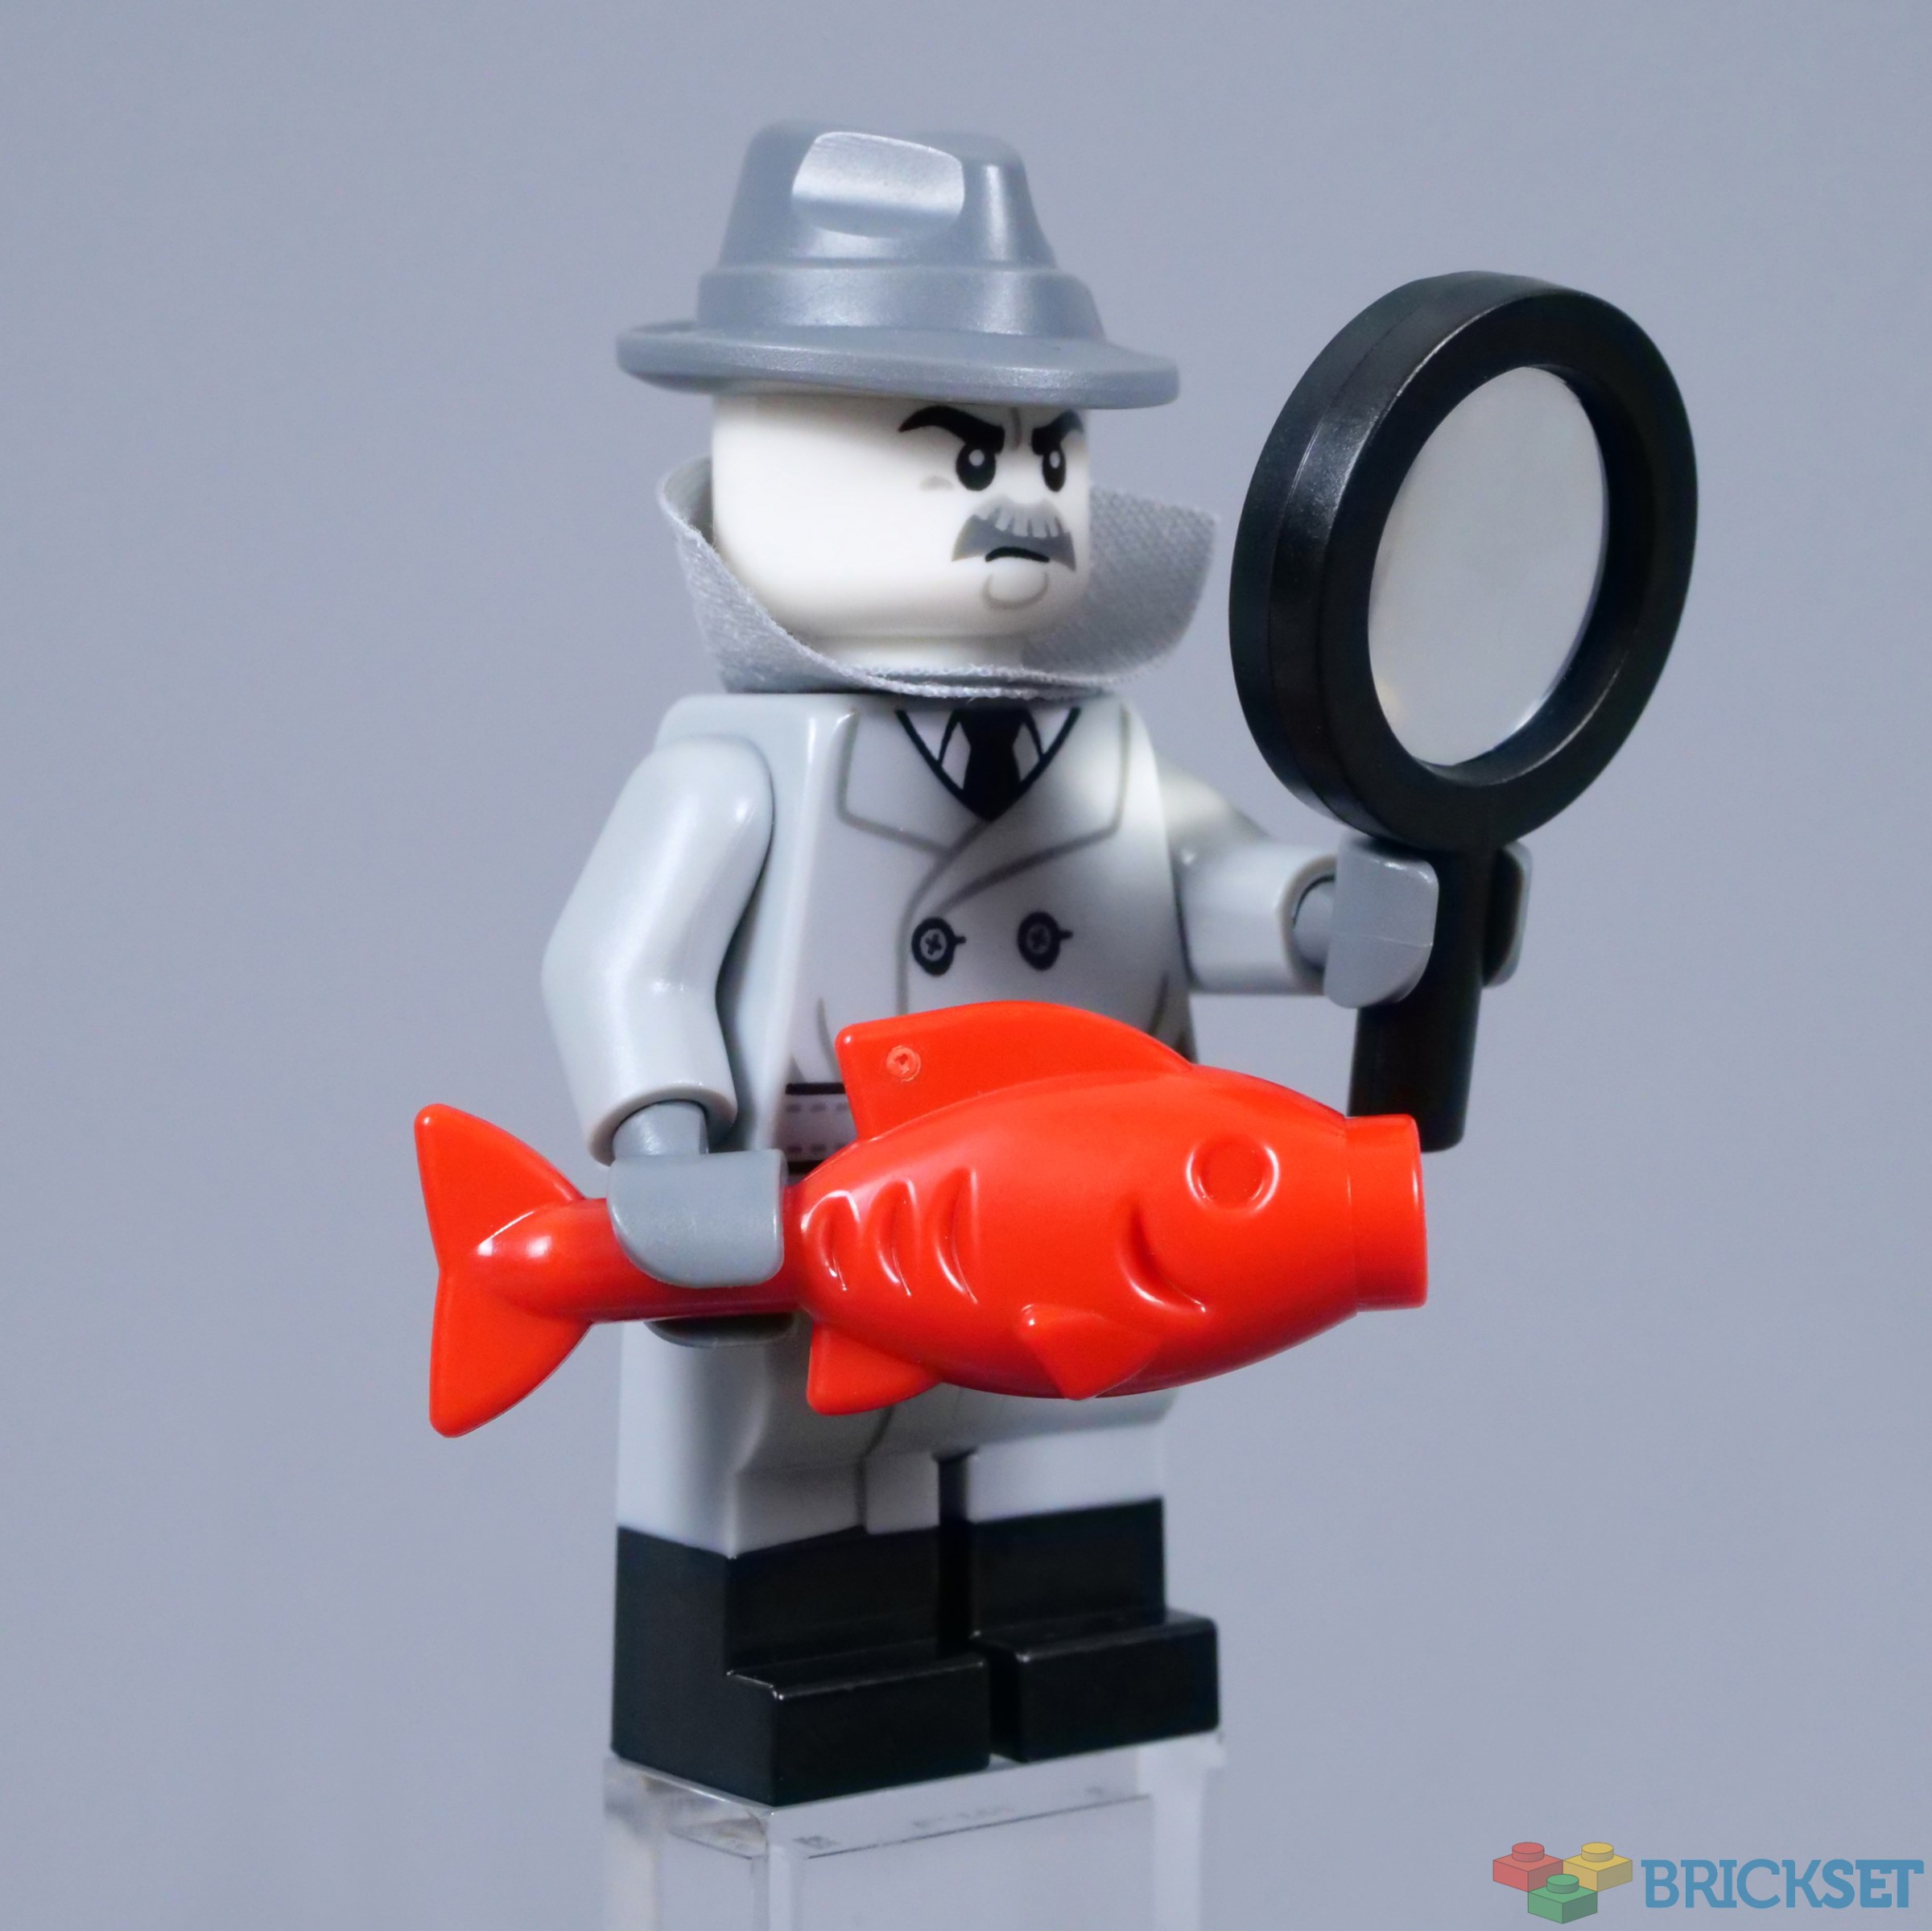 LEGO 71045 Collectible Minifigures Series 25; is this series the GOAT  (Greatest Of All Time)? [Review] - The Brothers Brick